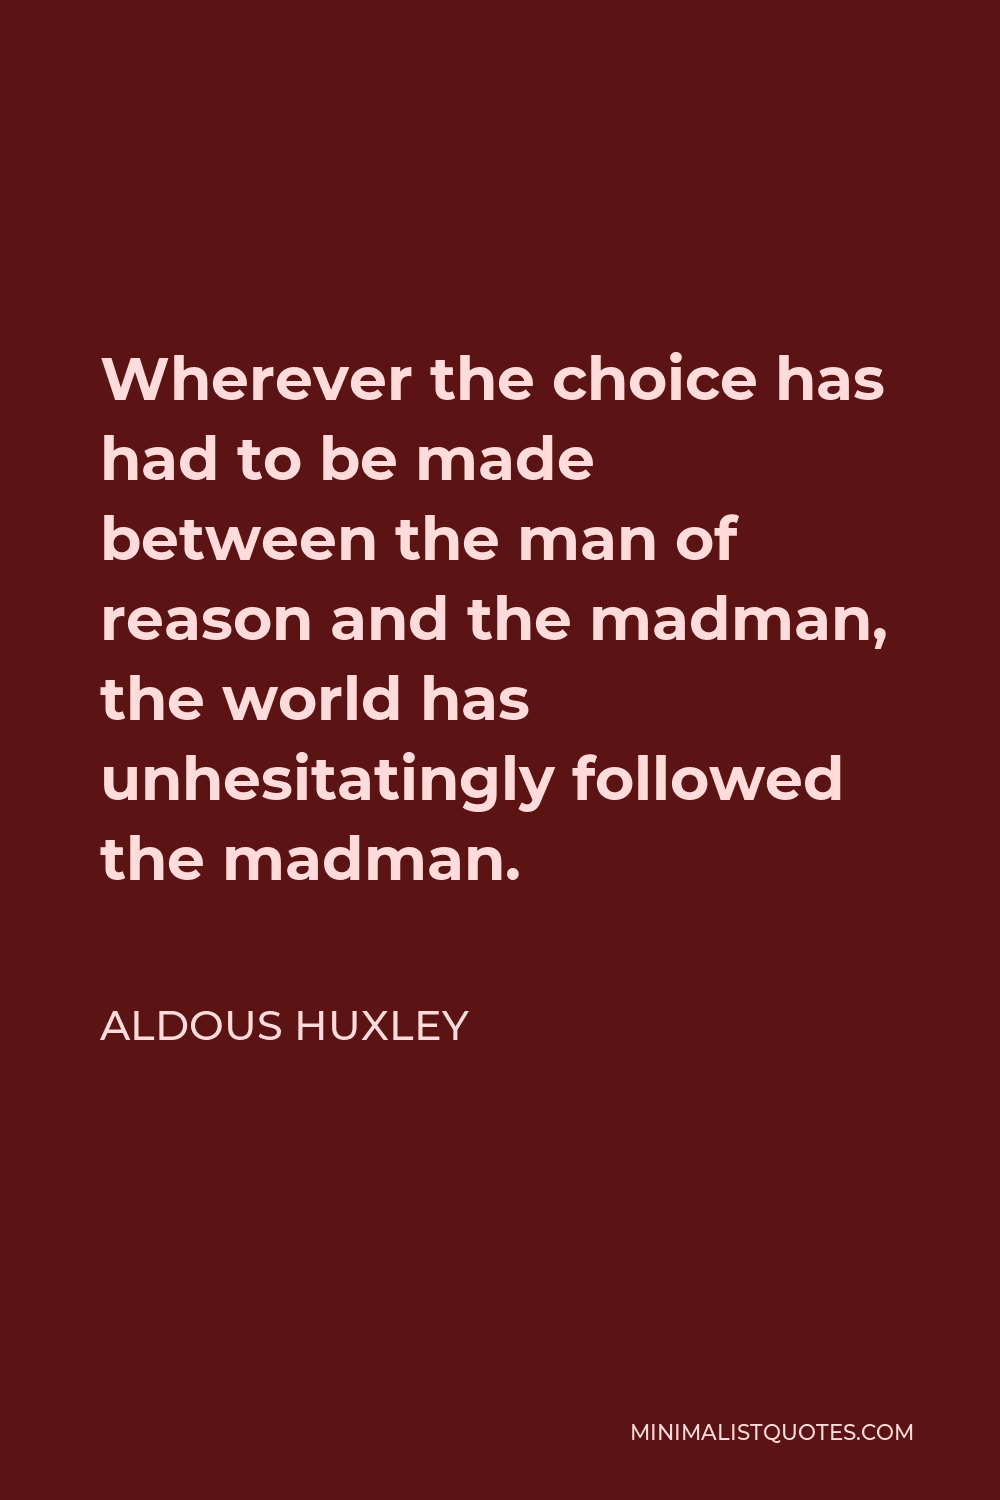 Aldous Huxley Quote - Wherever the choice has had to be made between the man of reason and the madman, the world has unhesitatingly followed the madman.